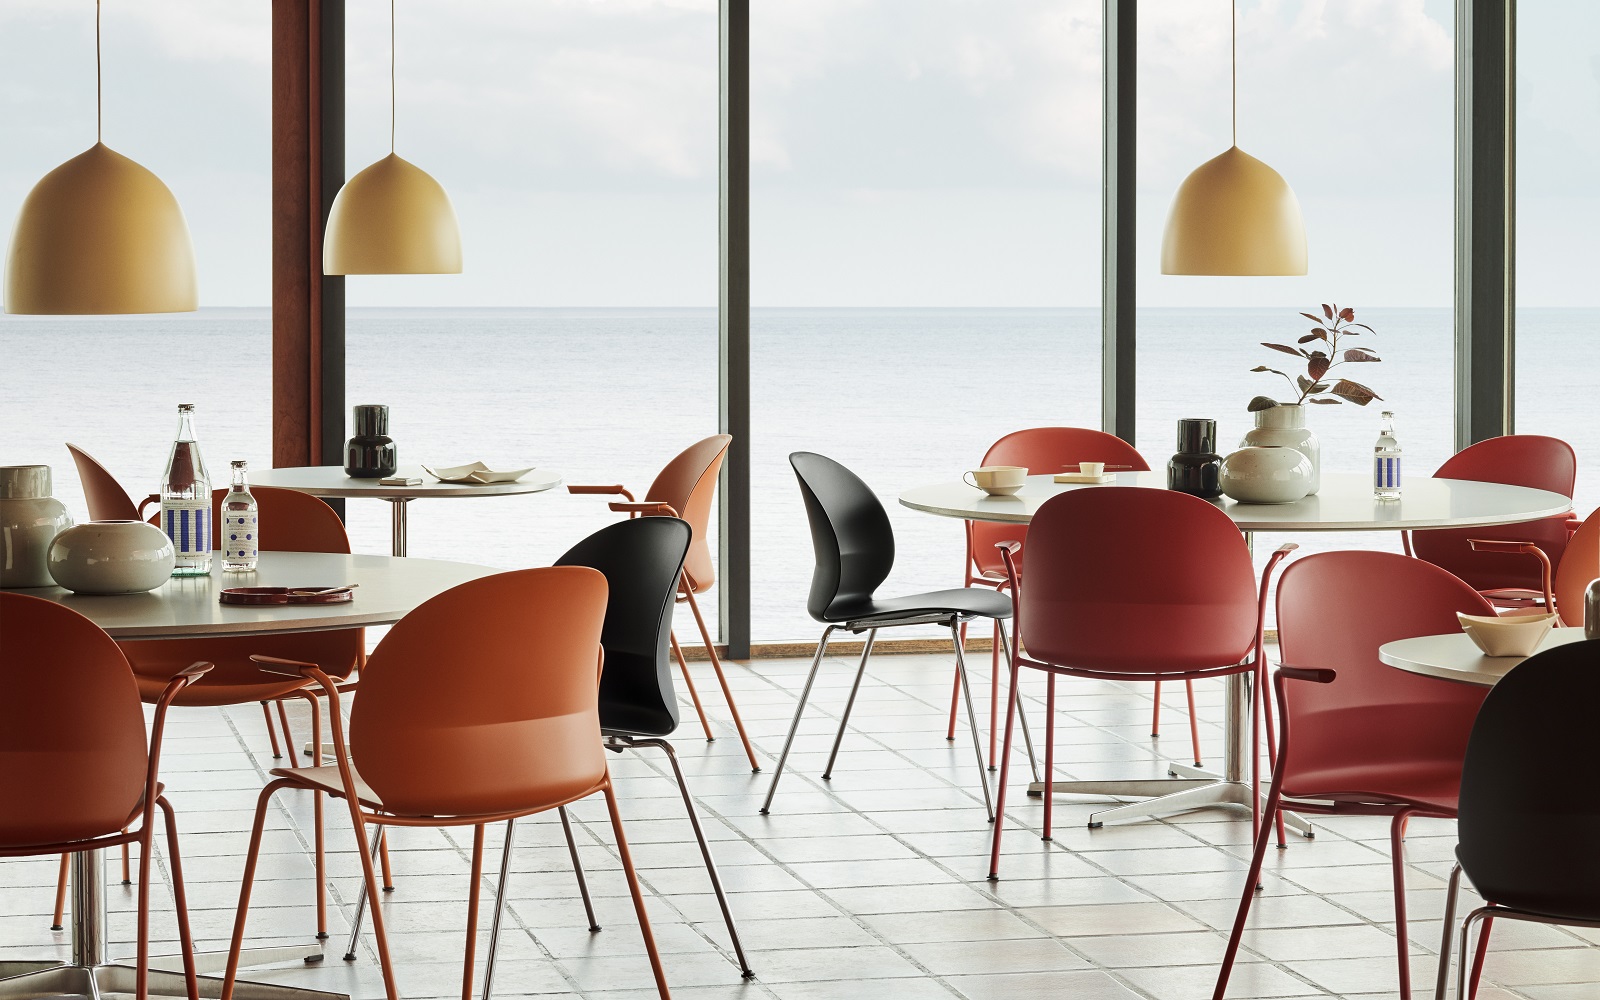 dark orange, red and black recycled chairs from ?Fritz Hansen in a restaurant setting with sea view